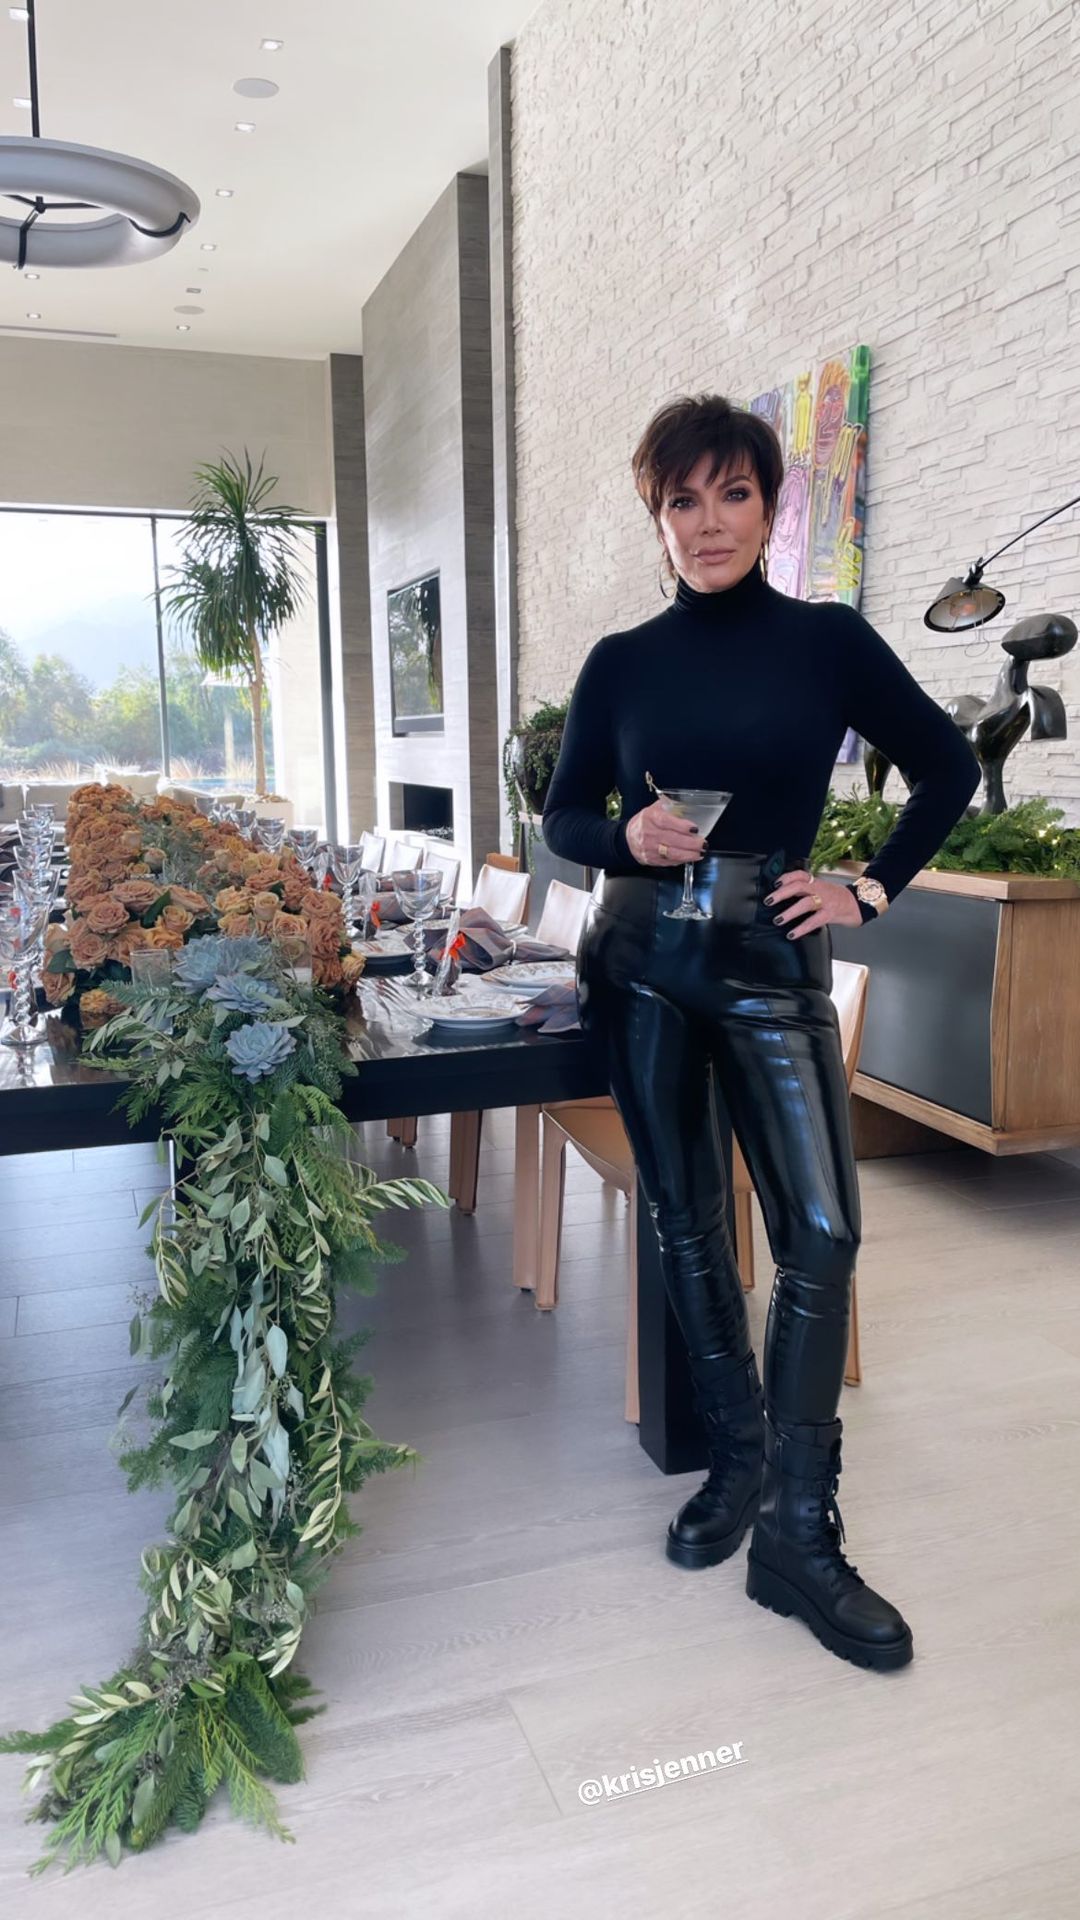 Kris Jenner Shows Off Curves in Chic, Black Outfit: See the Pics!